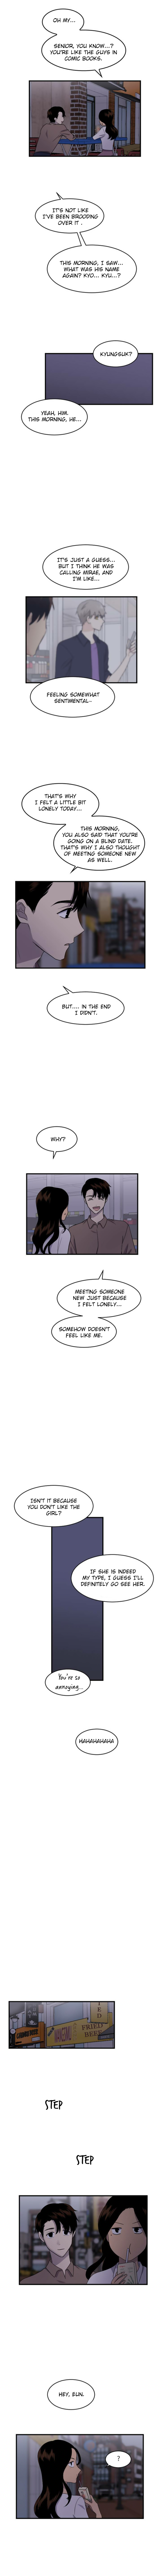 My ID is Gangnam Beauty Ch. 82 Extra 2 Ideal Type (2nd Part)